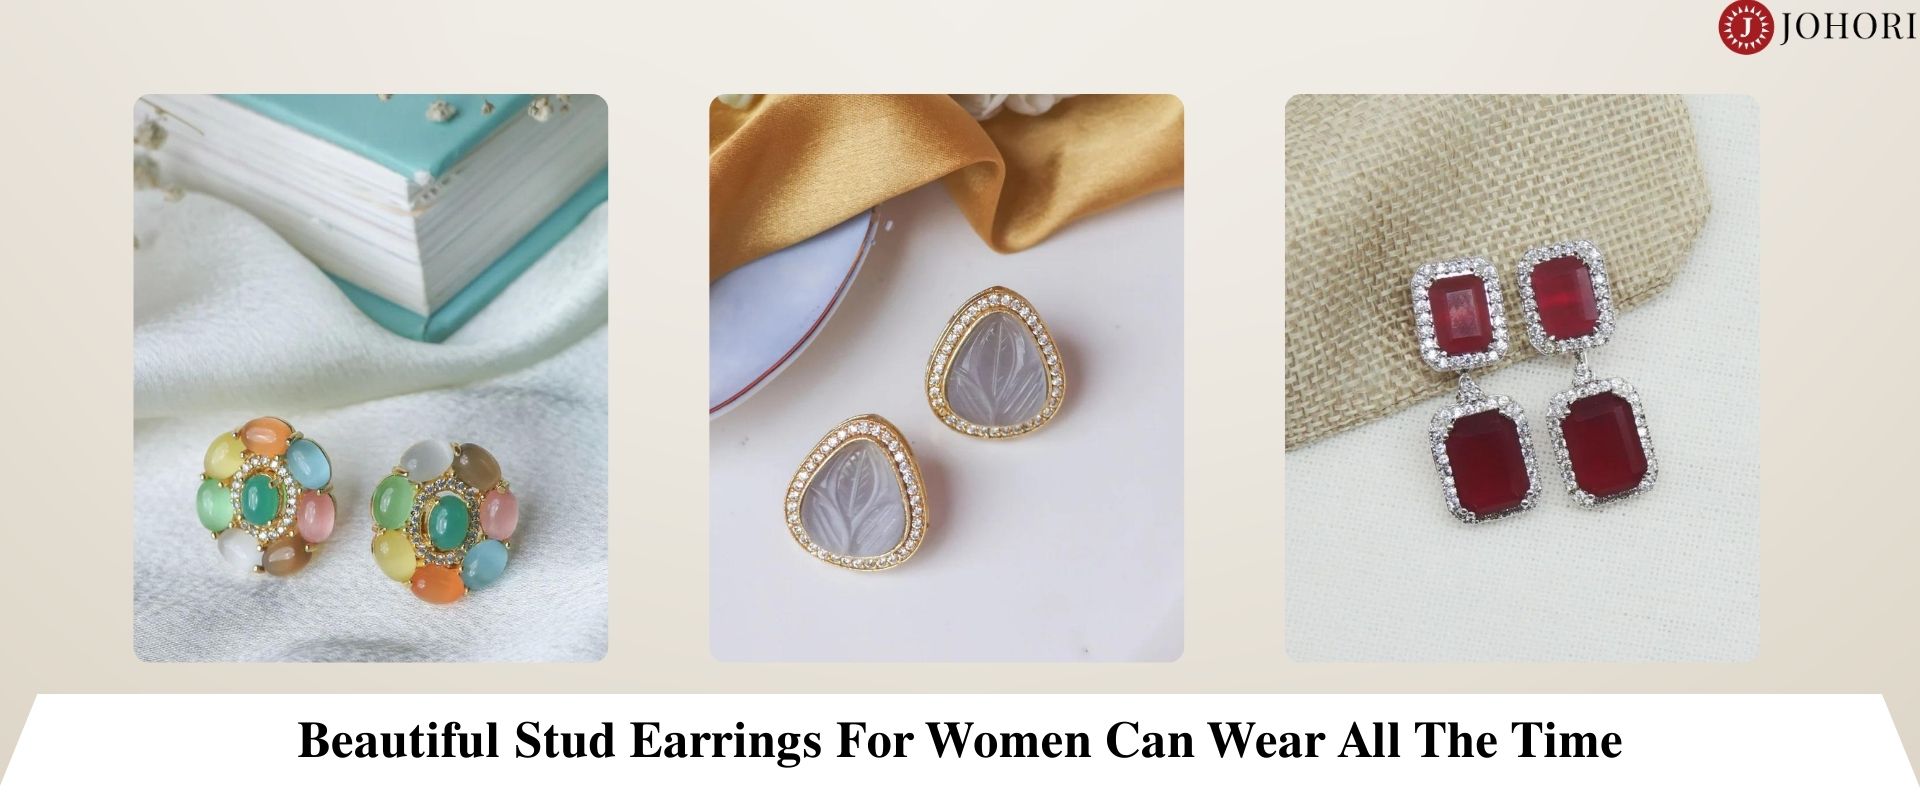 Beautiful Stud Earrings For Women Can Wear All The Time